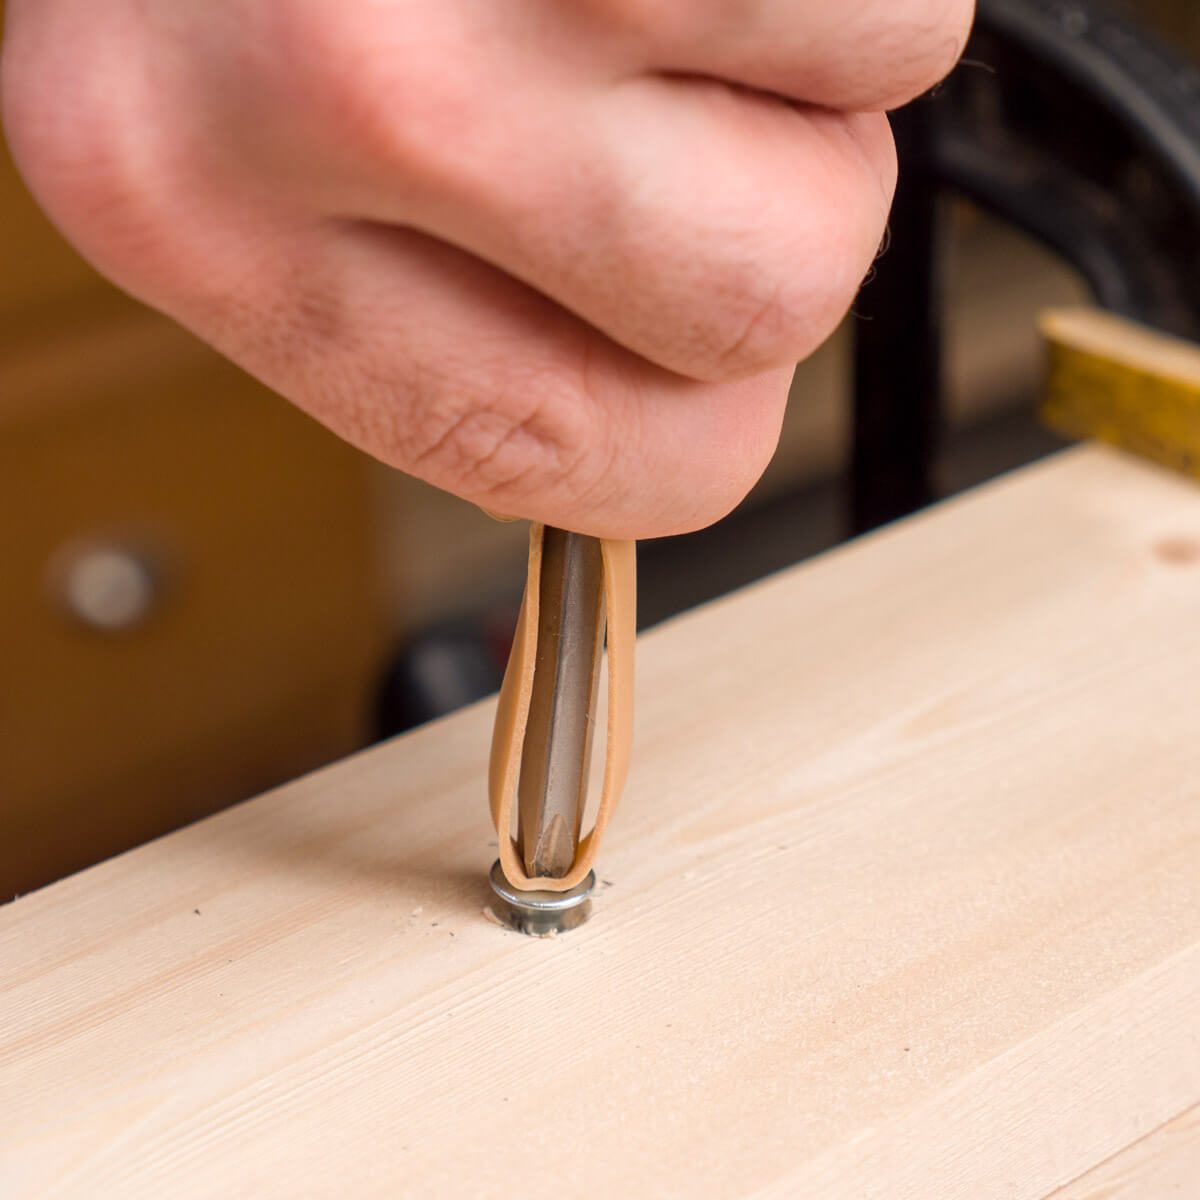 Stripped Screw Hack: Use a Rubber Band to Grip Stripped Screws